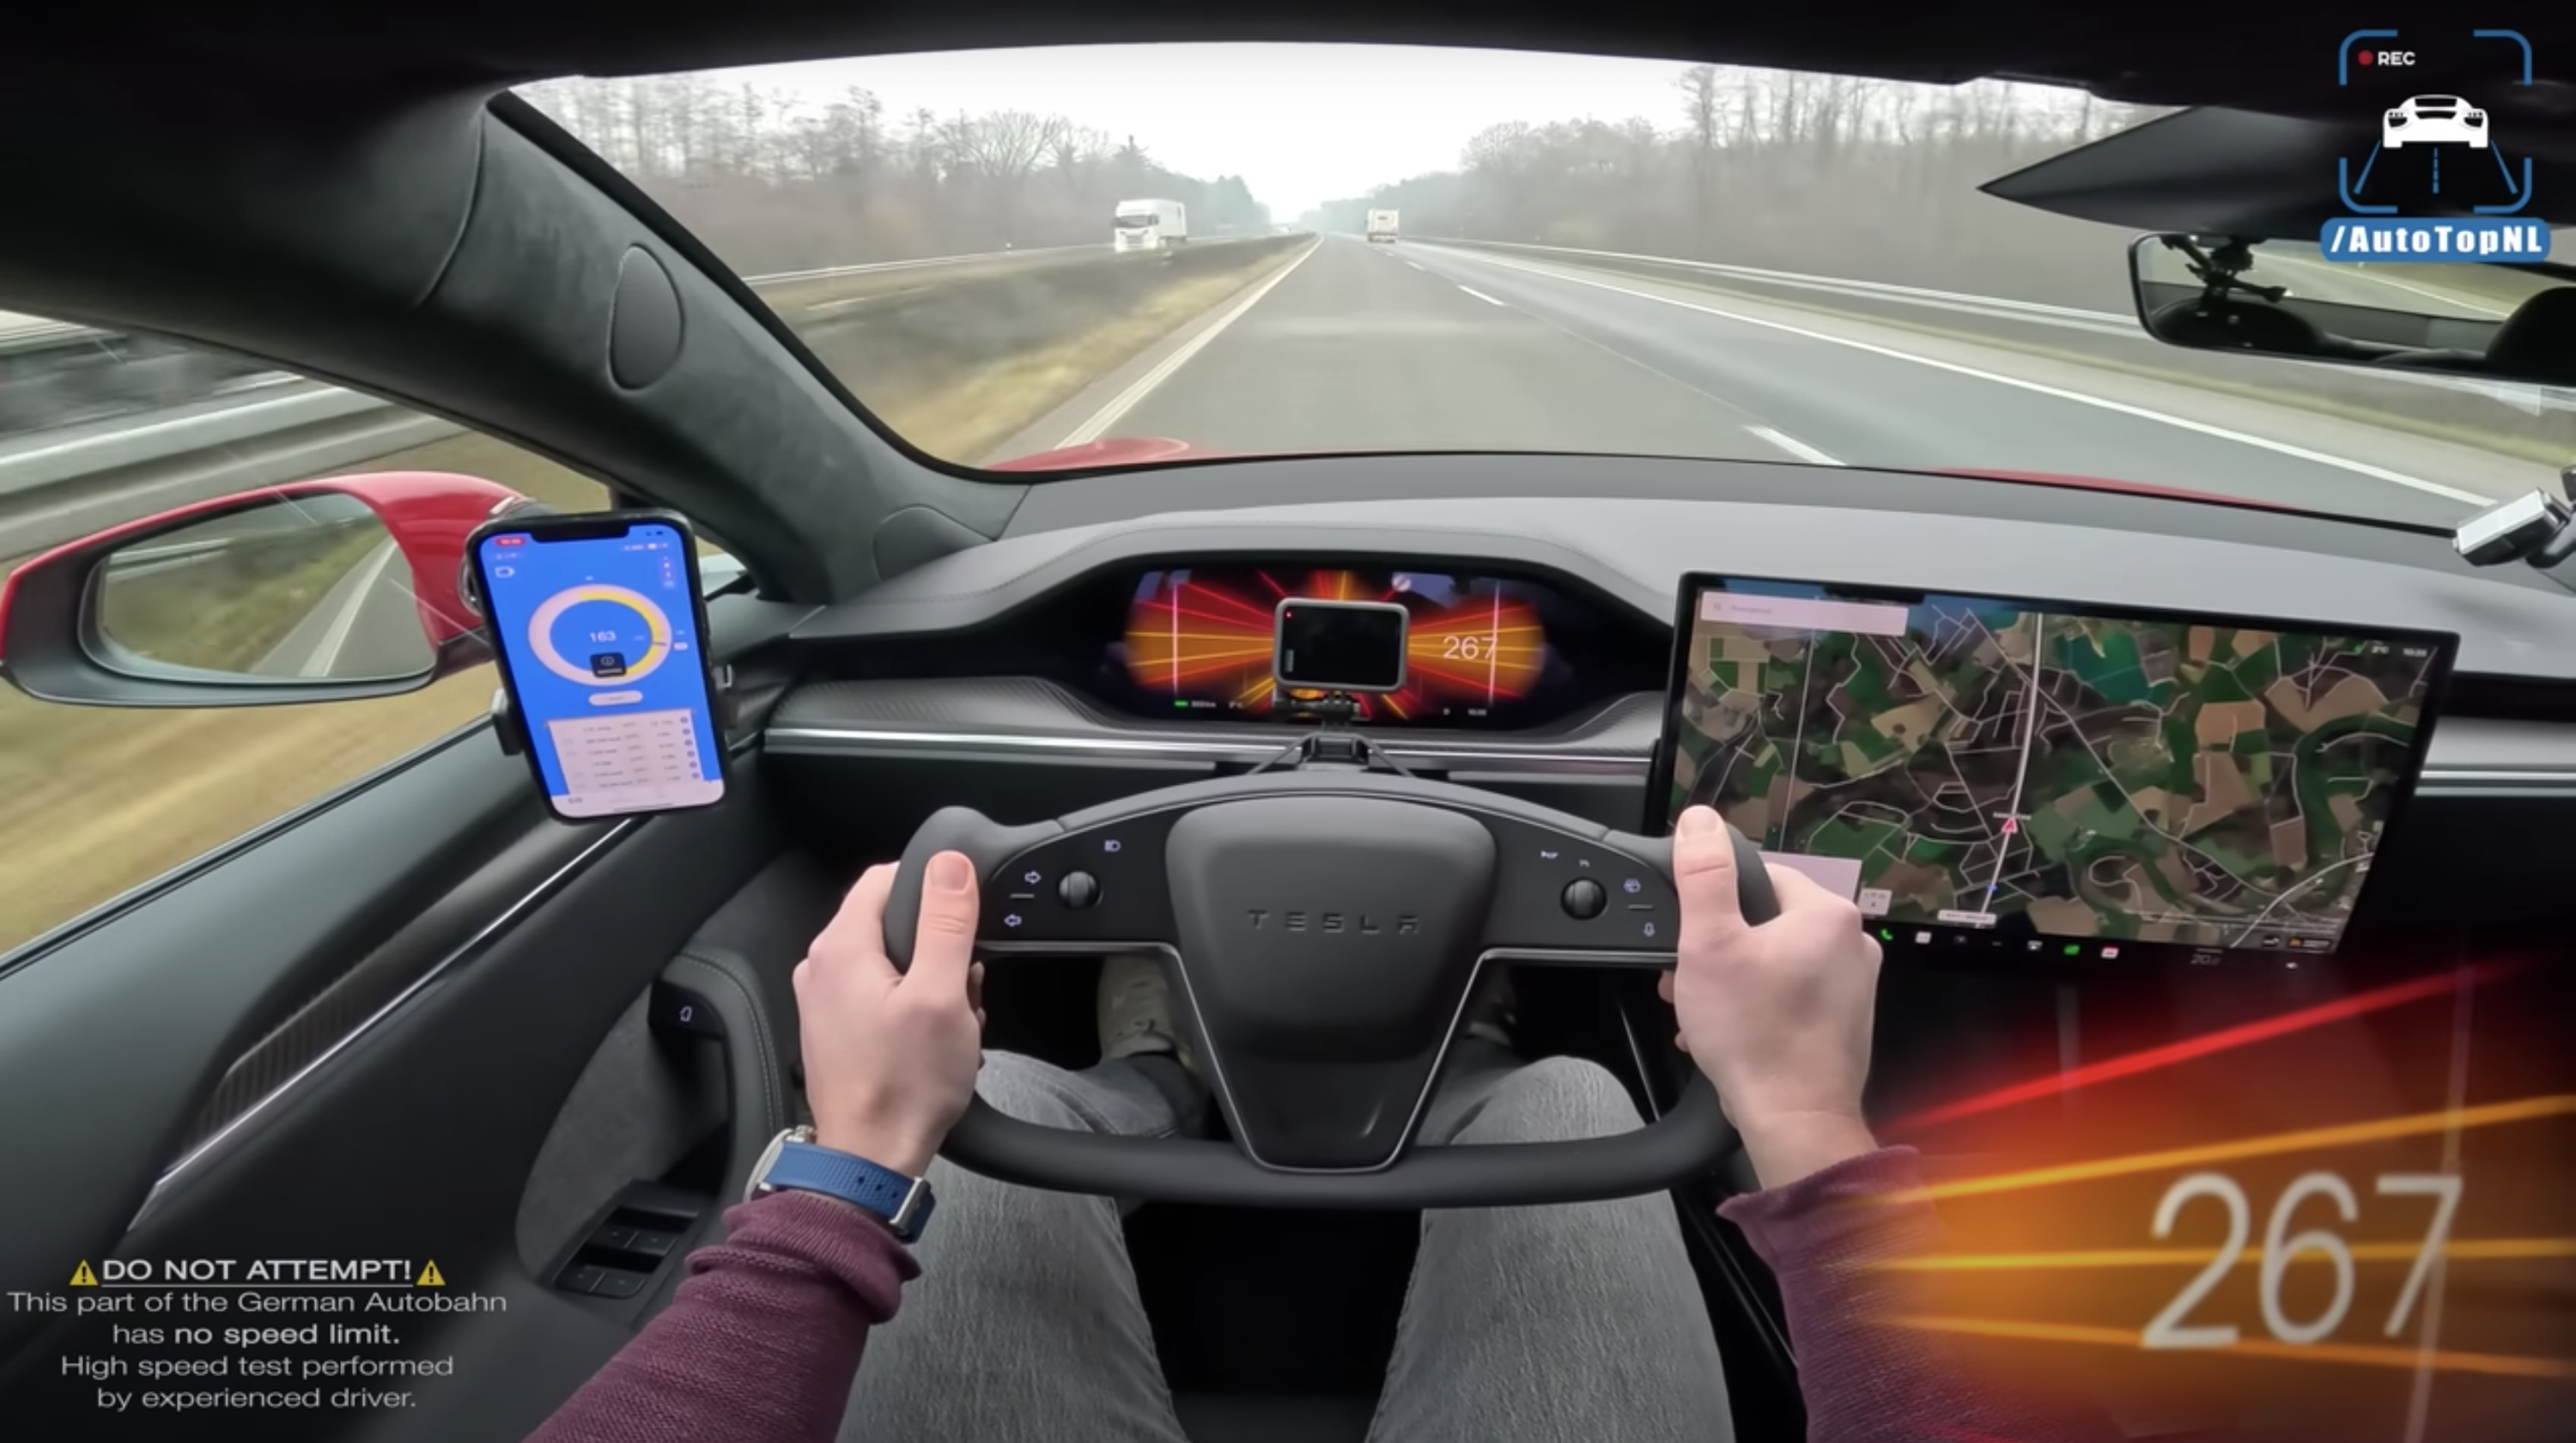 Tesla Model Y Visits German Autobahn, Goes For A Silent Top Speed